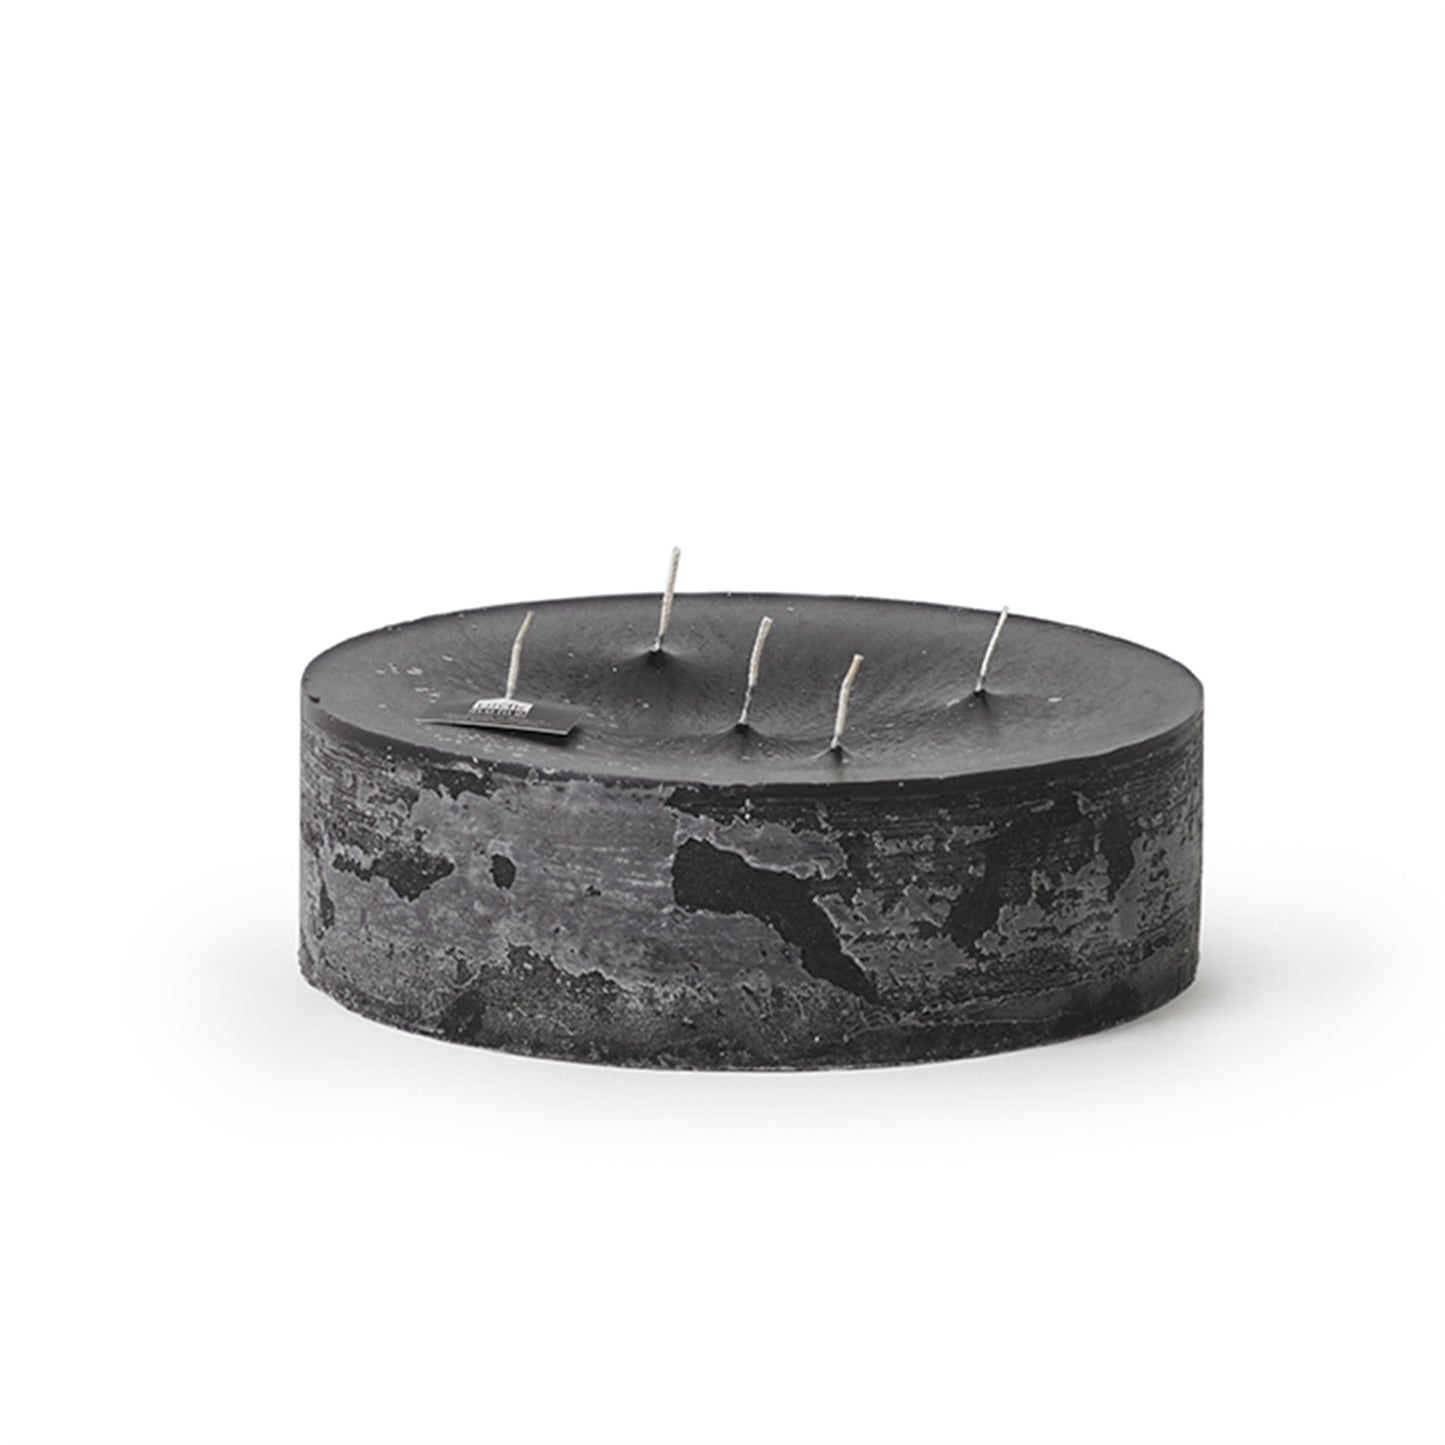 The Pillar Super Candle by BIDKhome | Luxury Candles | Willow & Albert Home